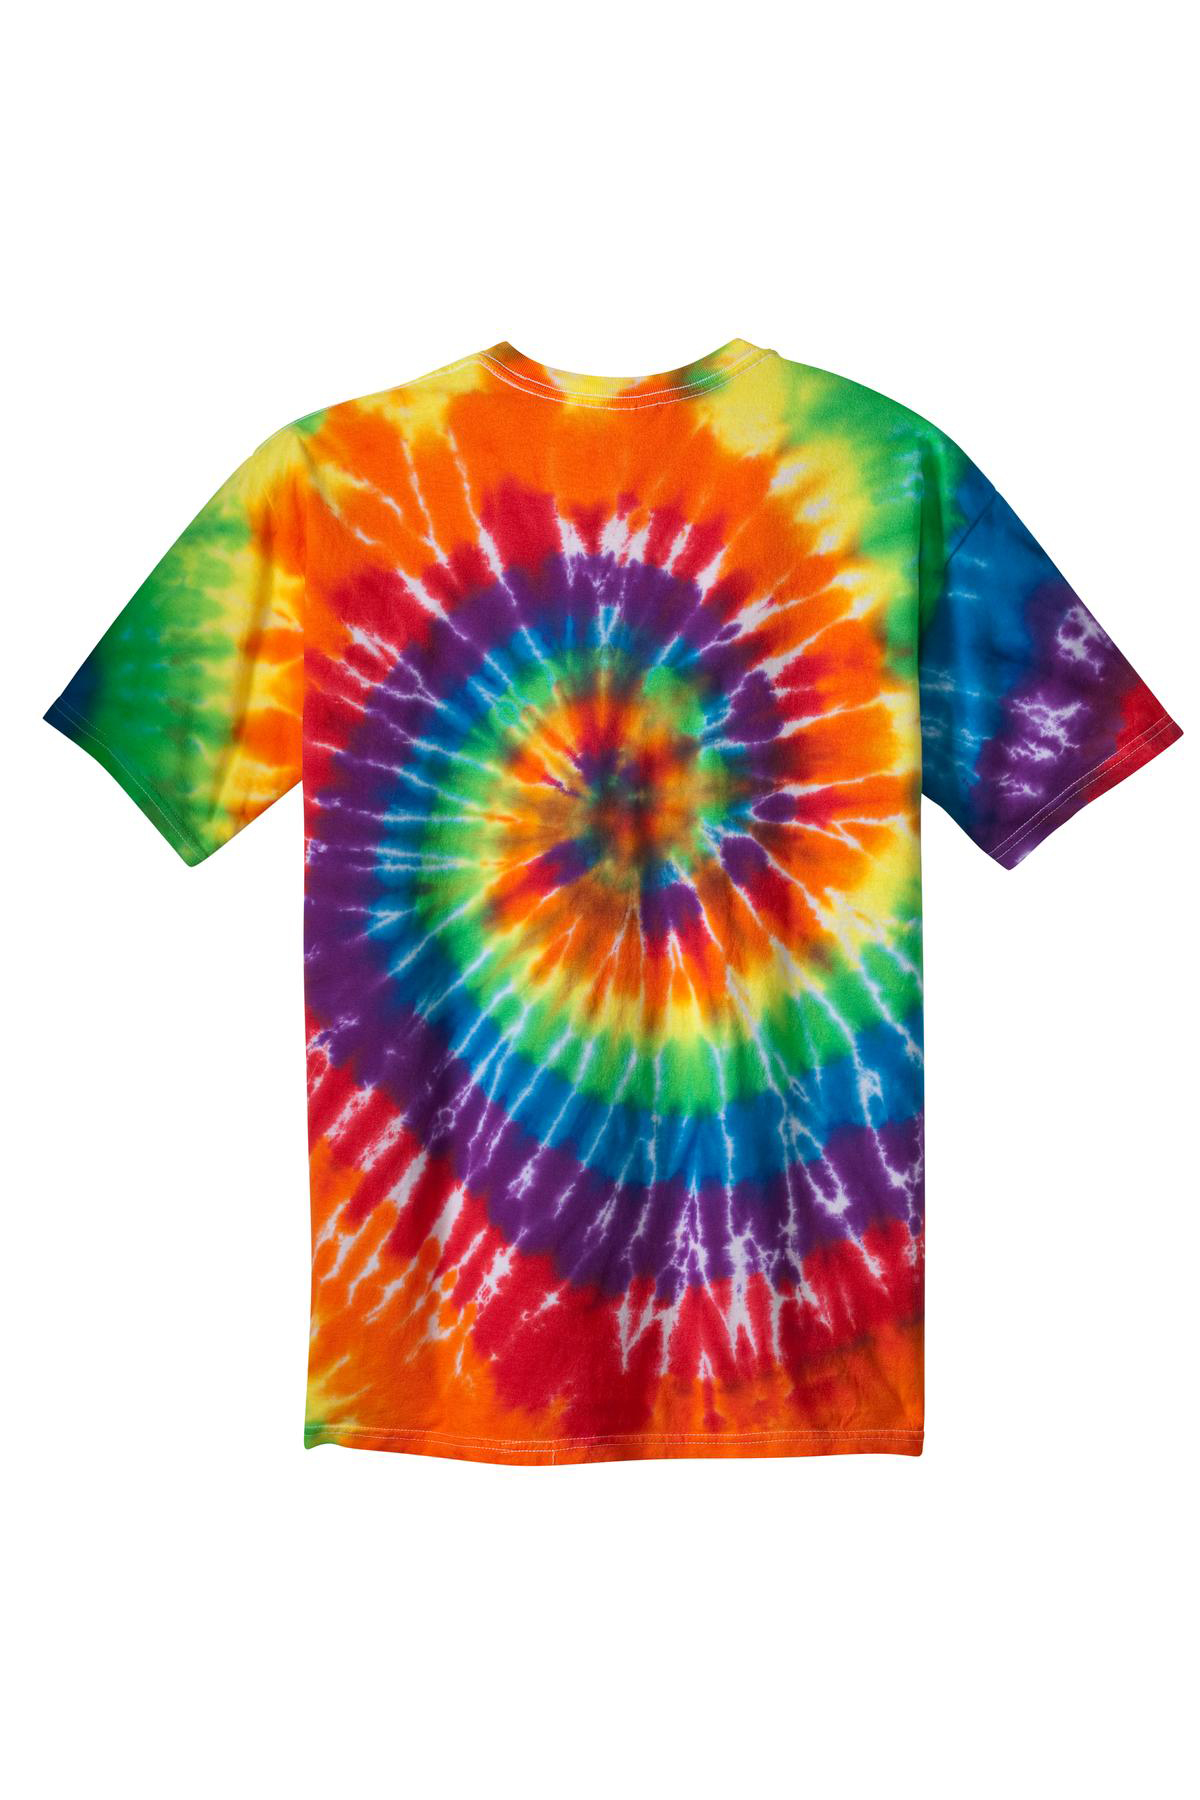 Youth Tie-Dye Trout Head T-Shirt (Color: Tie Dye Blue, Size: Youth Small)